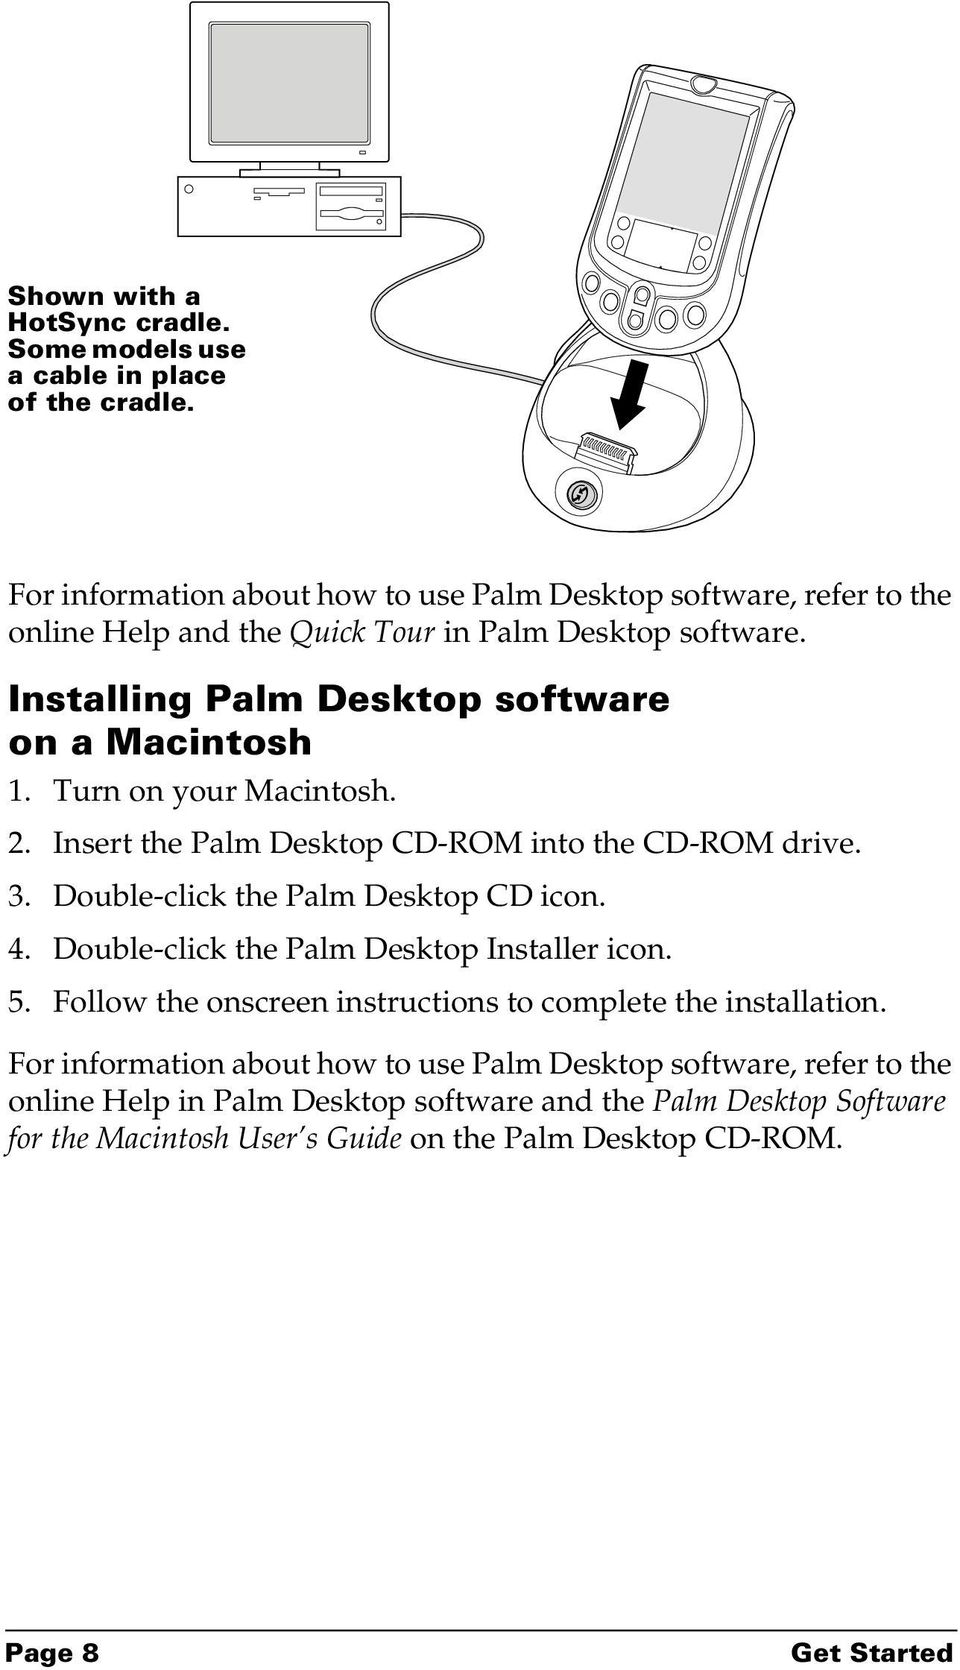 Turn on your Macintosh. 2. Insert the Palm Desktop CD-ROM into the CD-ROM drive. 3. Double-click the Palm Desktop CD icon. 4. Double-click the Palm Desktop Installer icon. 5.